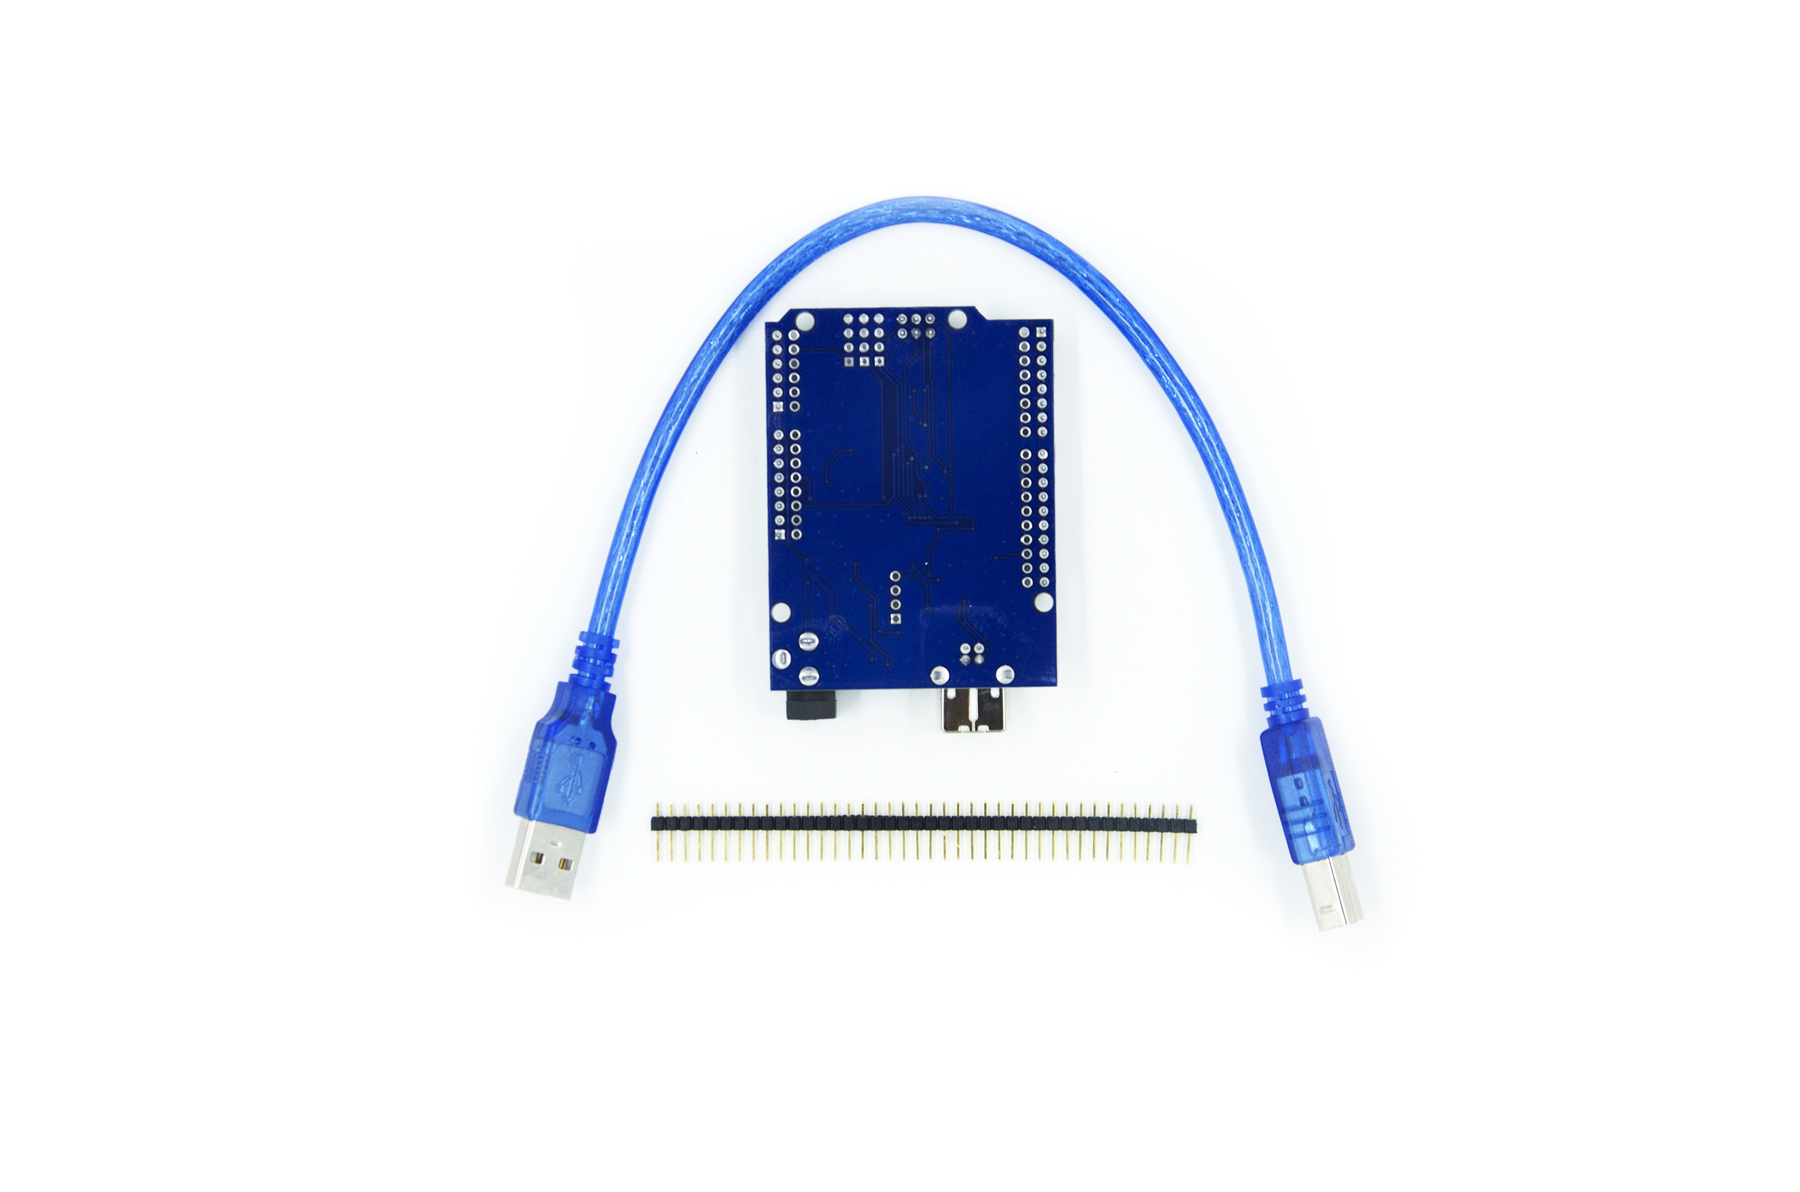 Arduinos UNO R3 with QFP chip ATmega328P and free cable